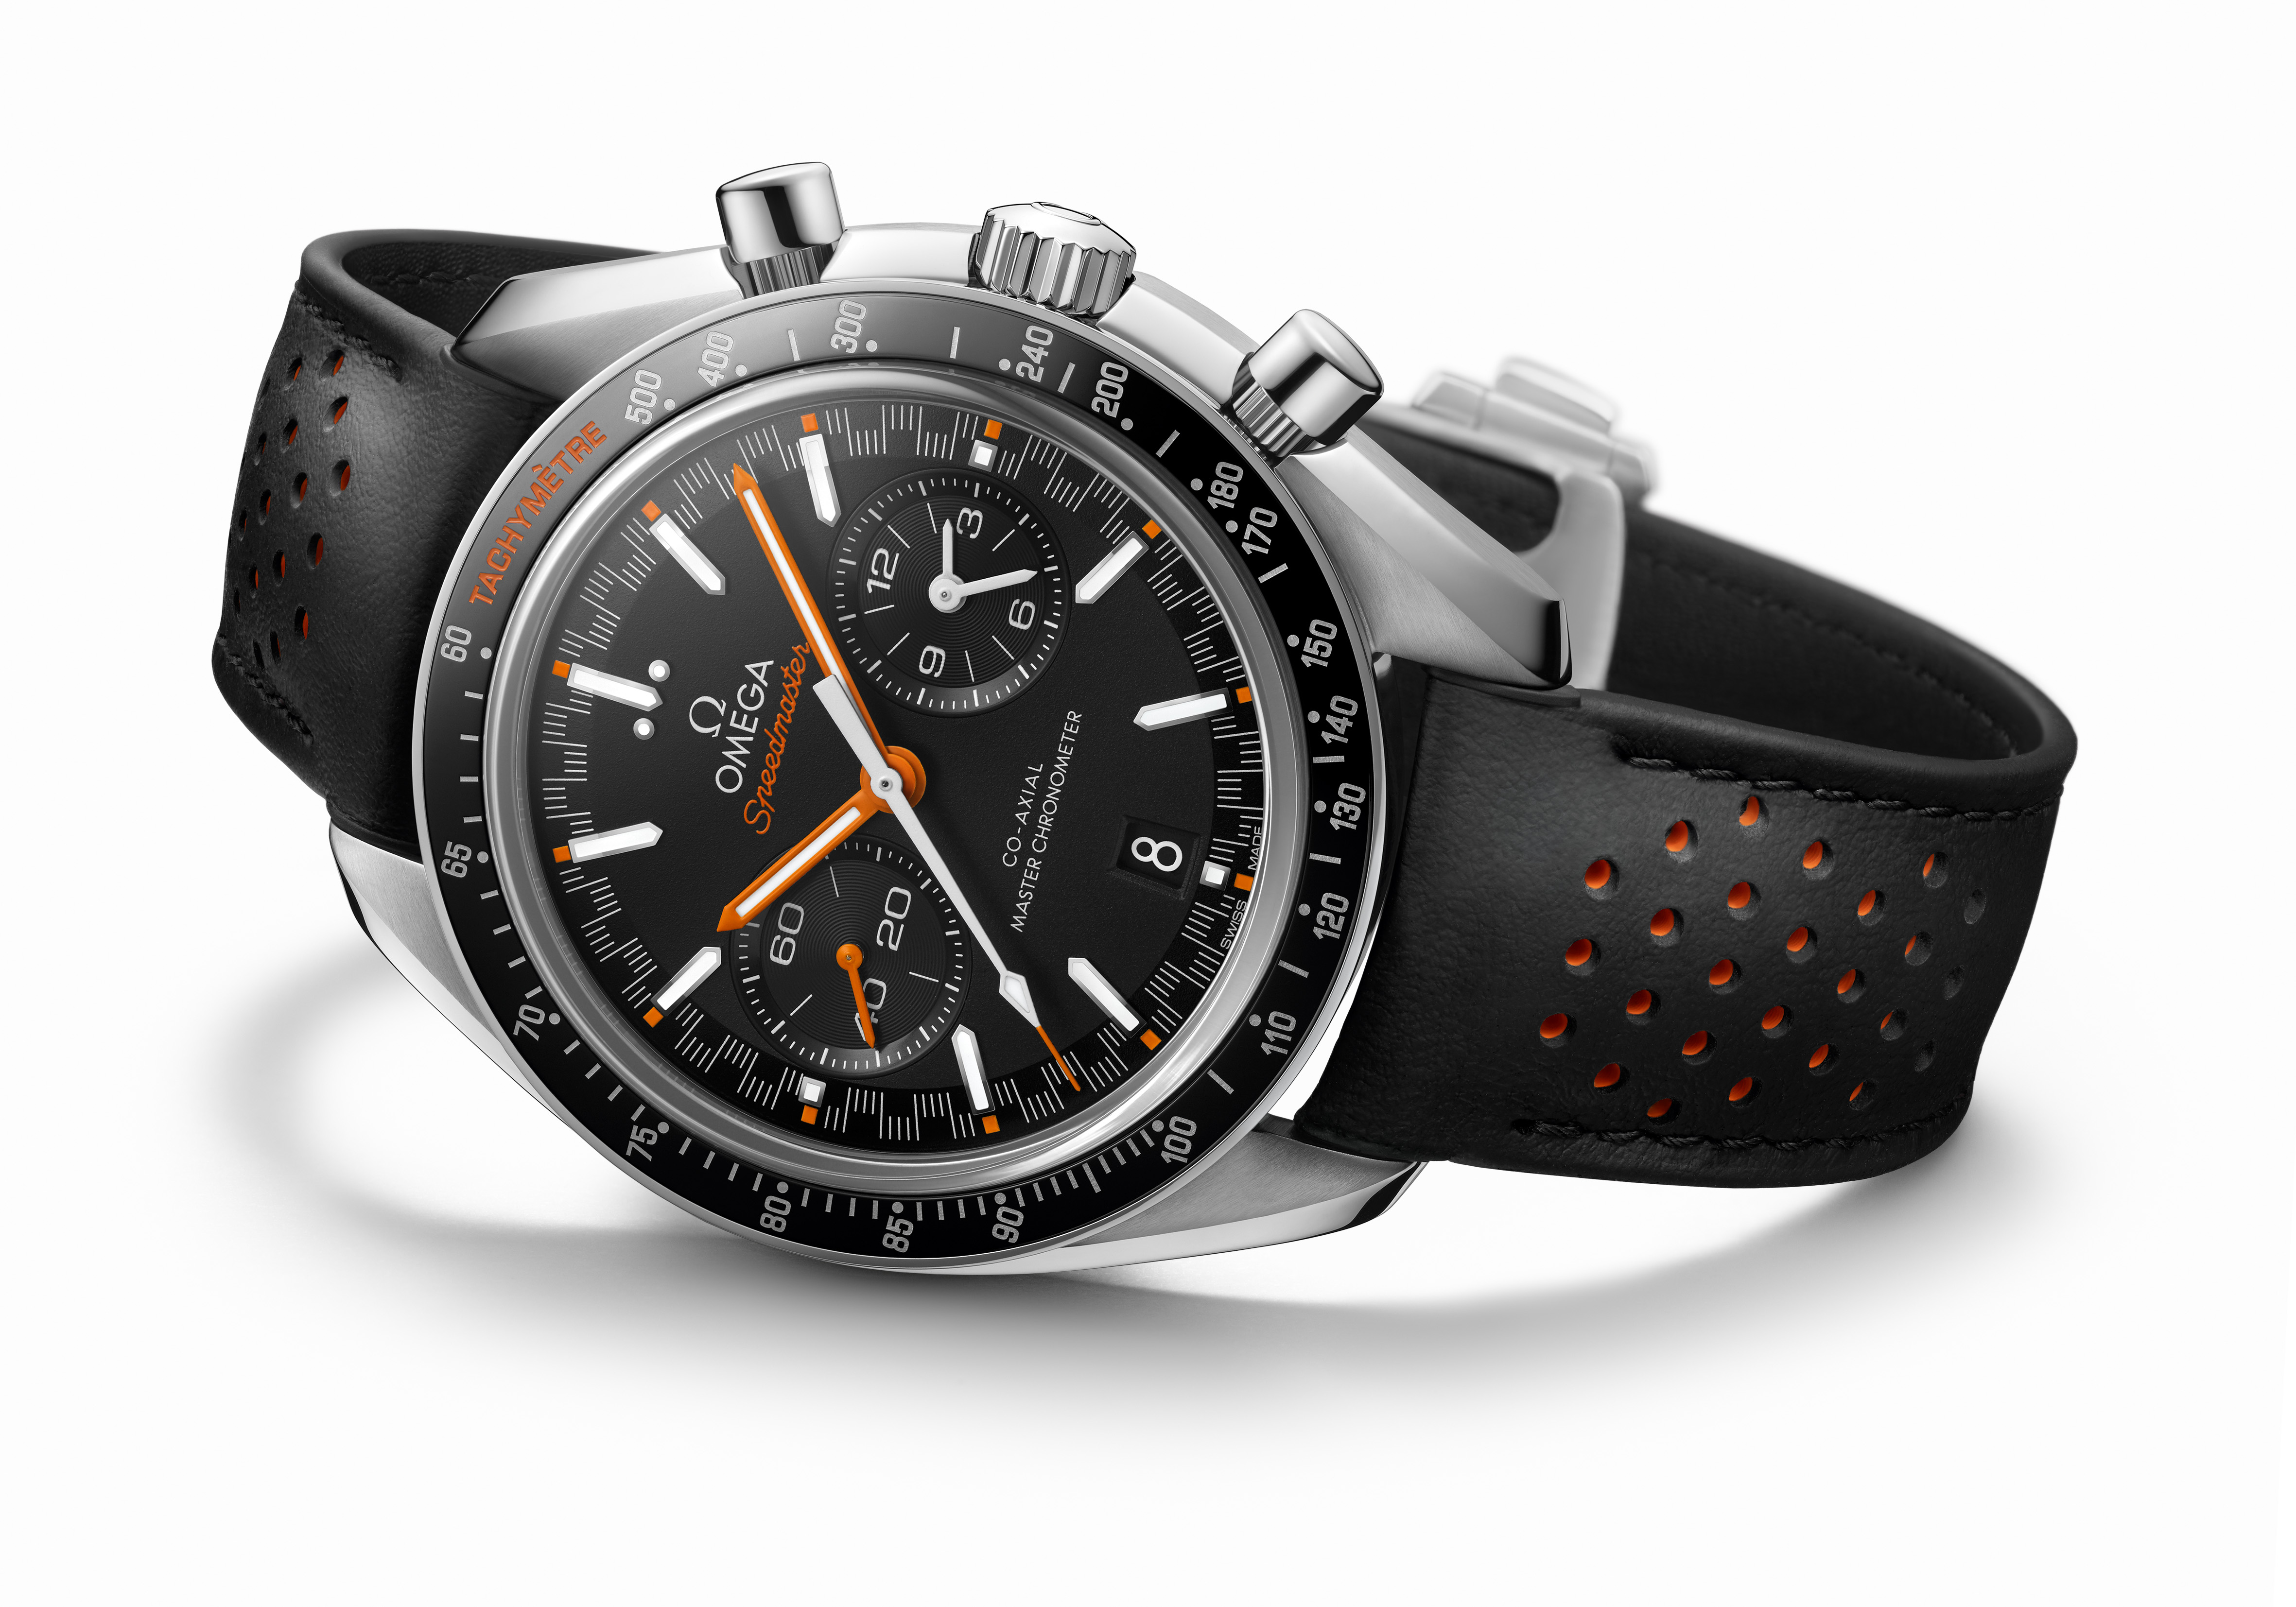 Speedmaster Moonwatch Automatic Master Chronometer works with high quality metals.